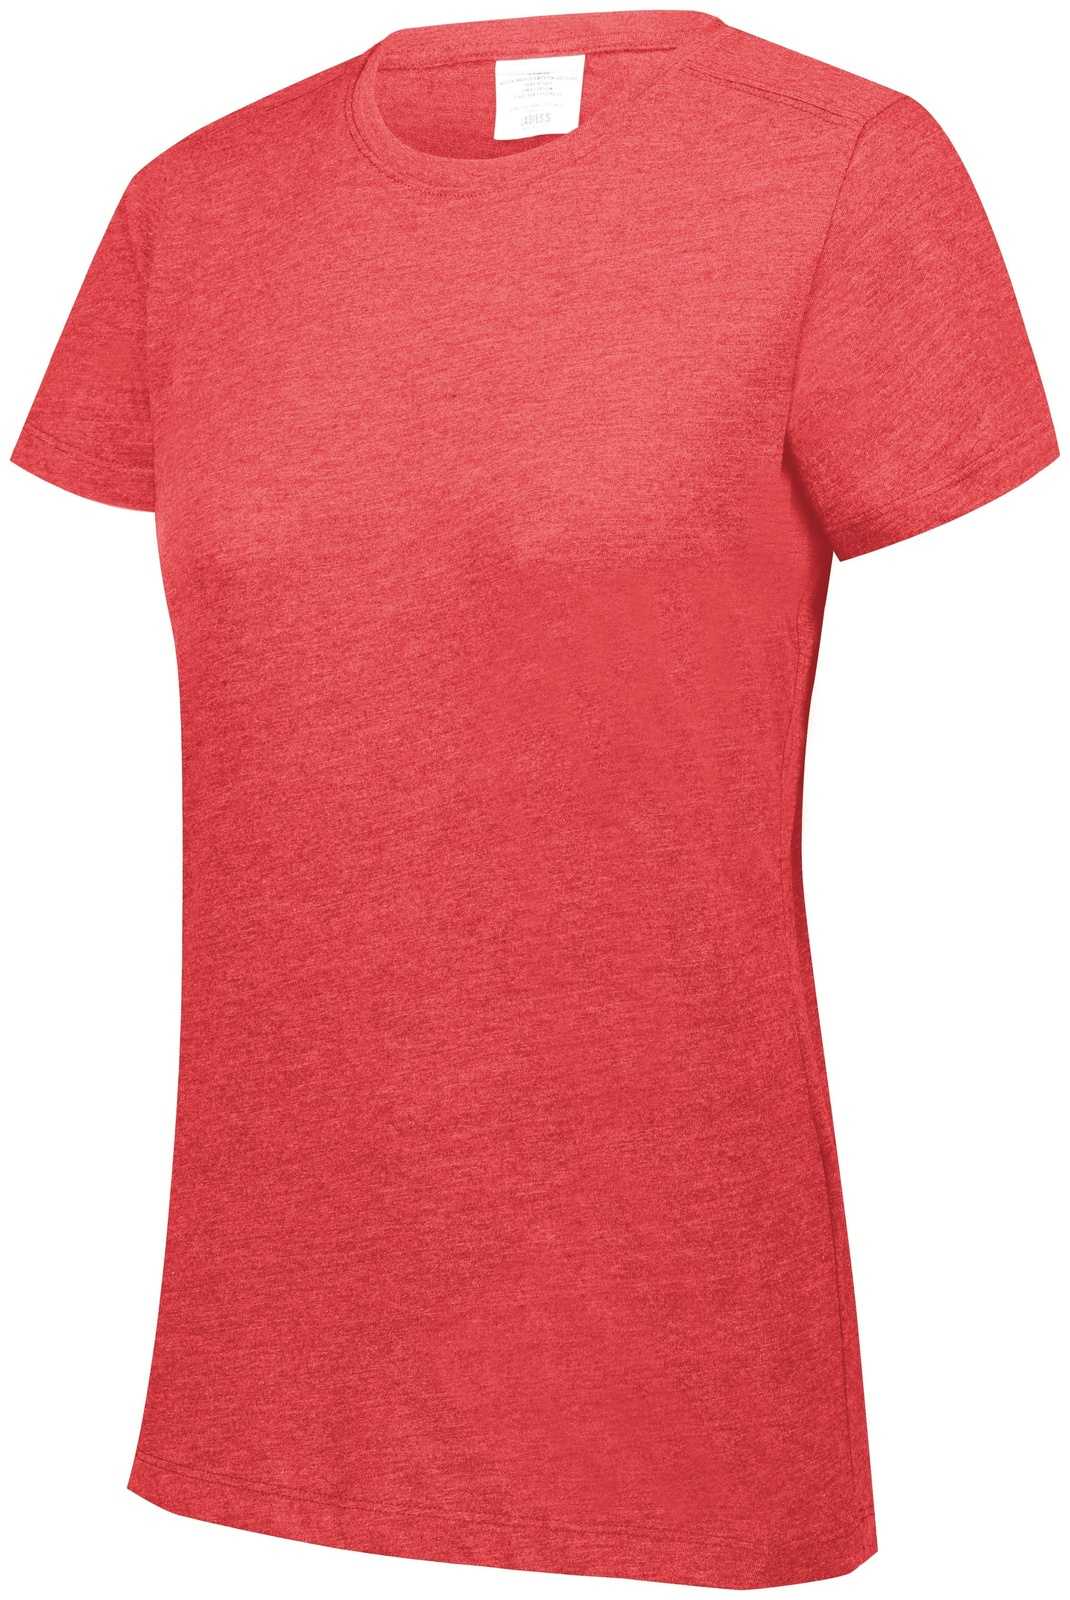 Augusta 3067 Ladies Tri-Blend T-Shirt - Red Heather - HIT a Double